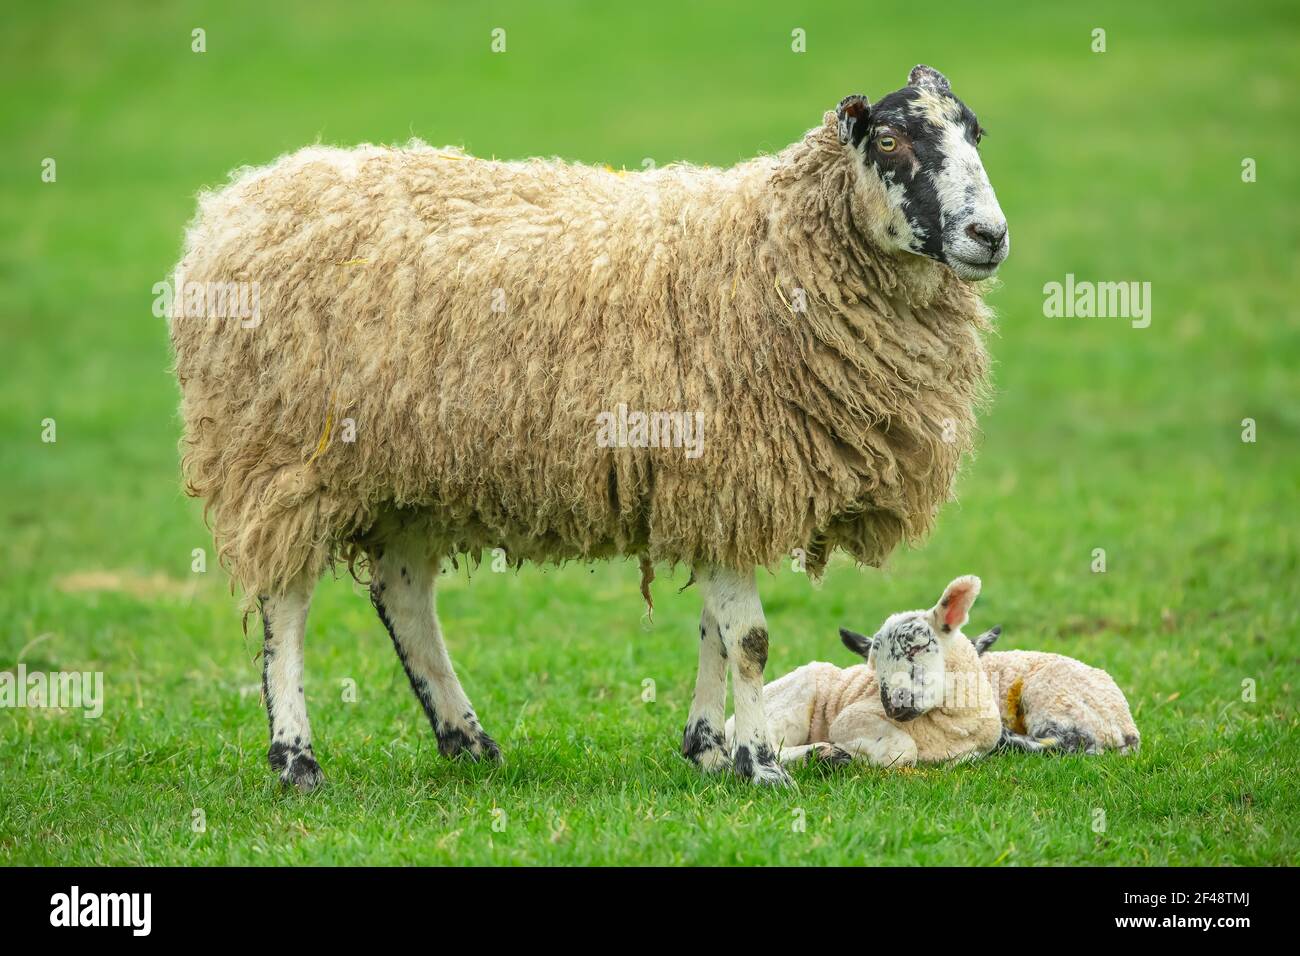 Swaledale mule sheep with her newborn twin lambs in Springtime, stood in green meadow. Both lambs are sleeping. Concept: a mother's love.  Landscape, Stock Photo